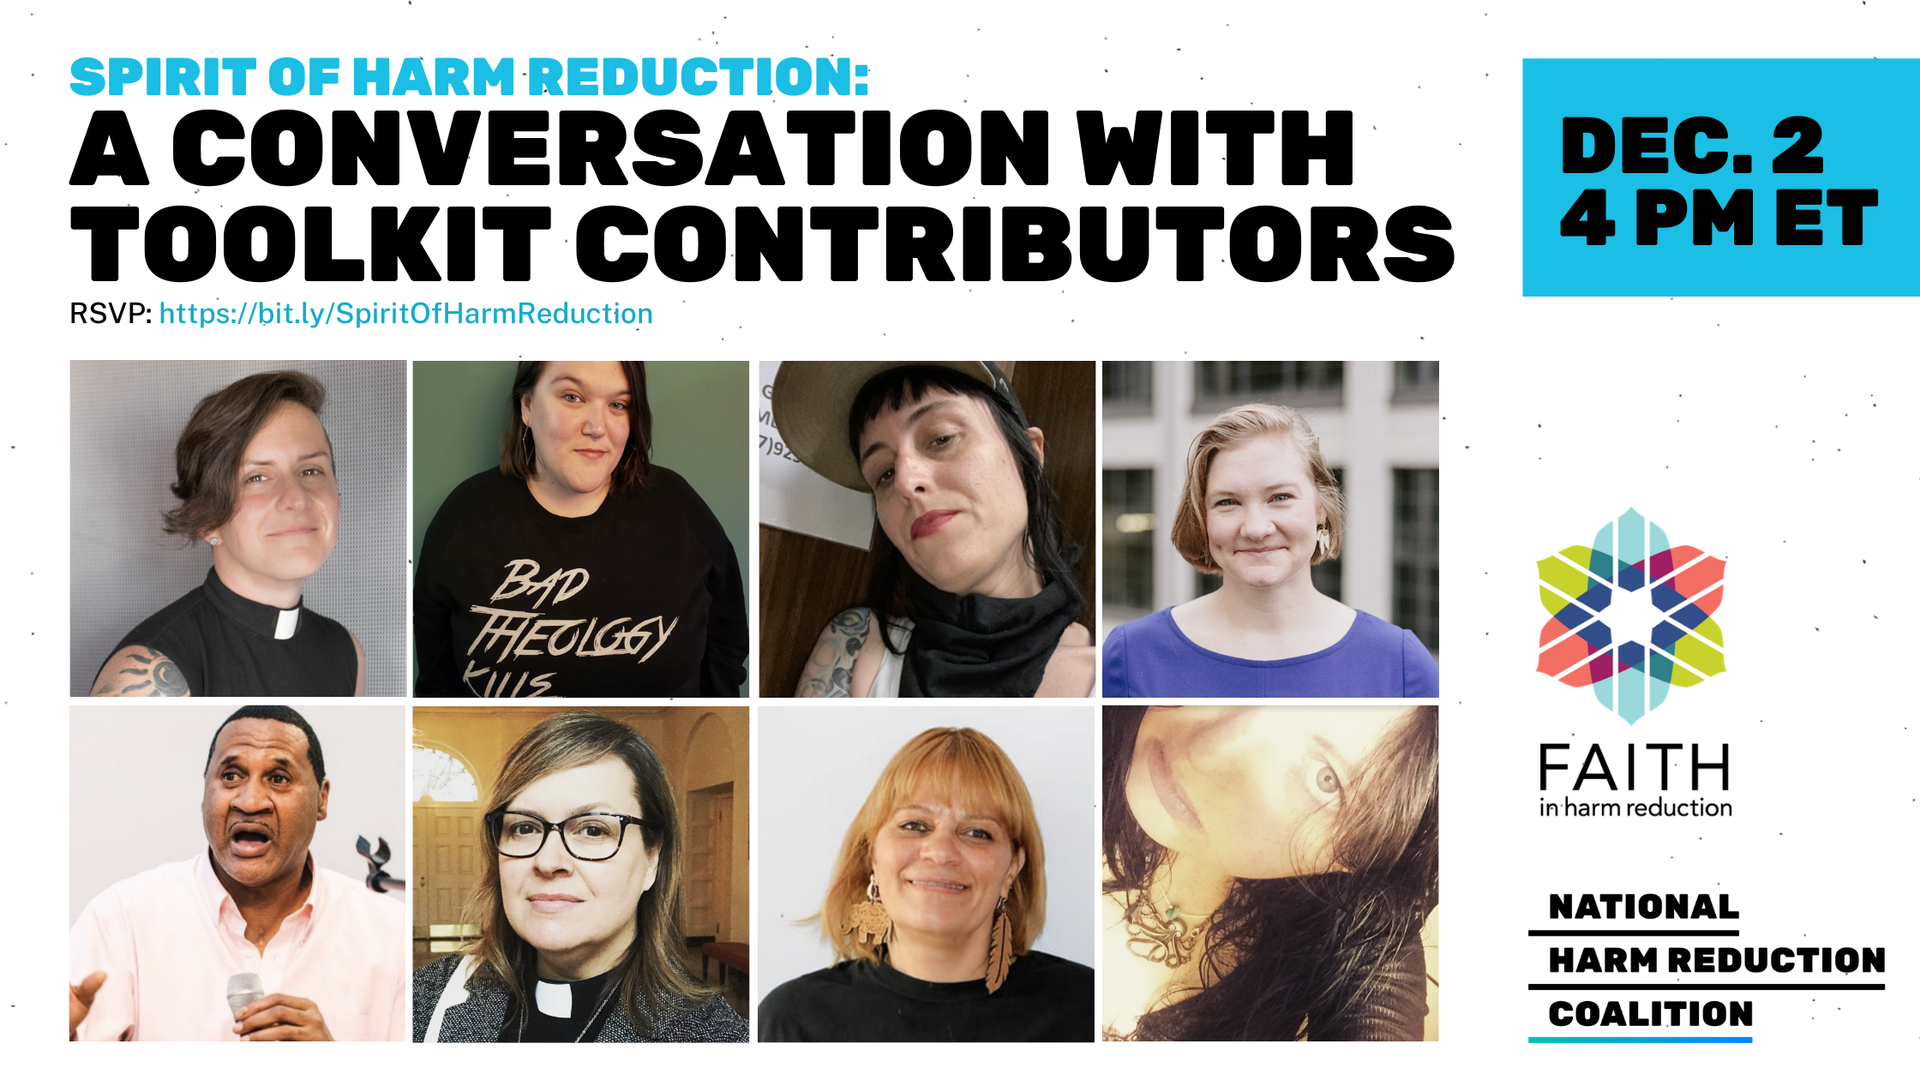 Spirit of Harm Reduction: A conversation with toolkit contributors